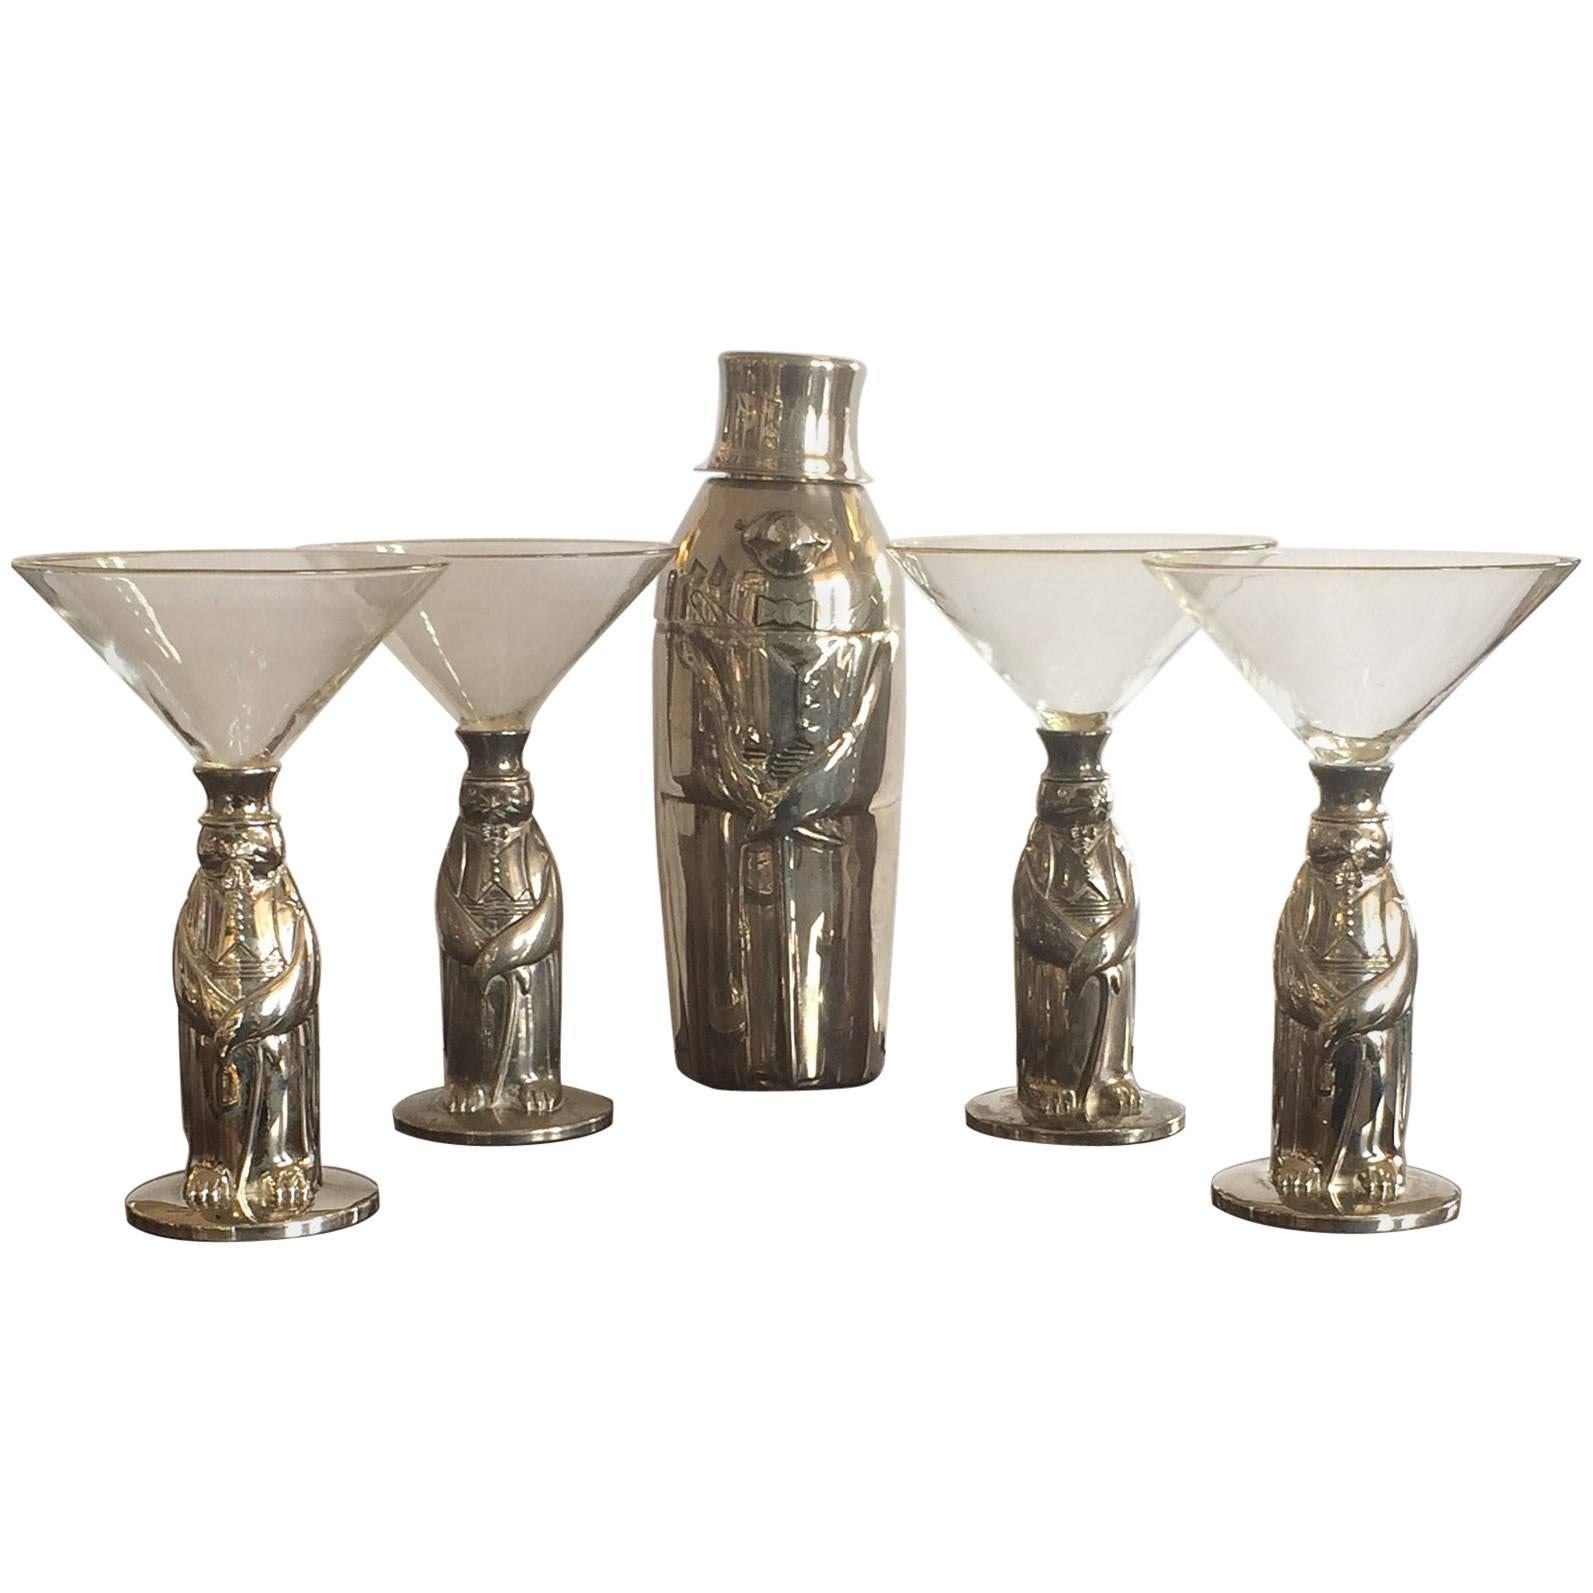 Midcentury Towle Penguin Cocktail Martini Shaker and Glasses